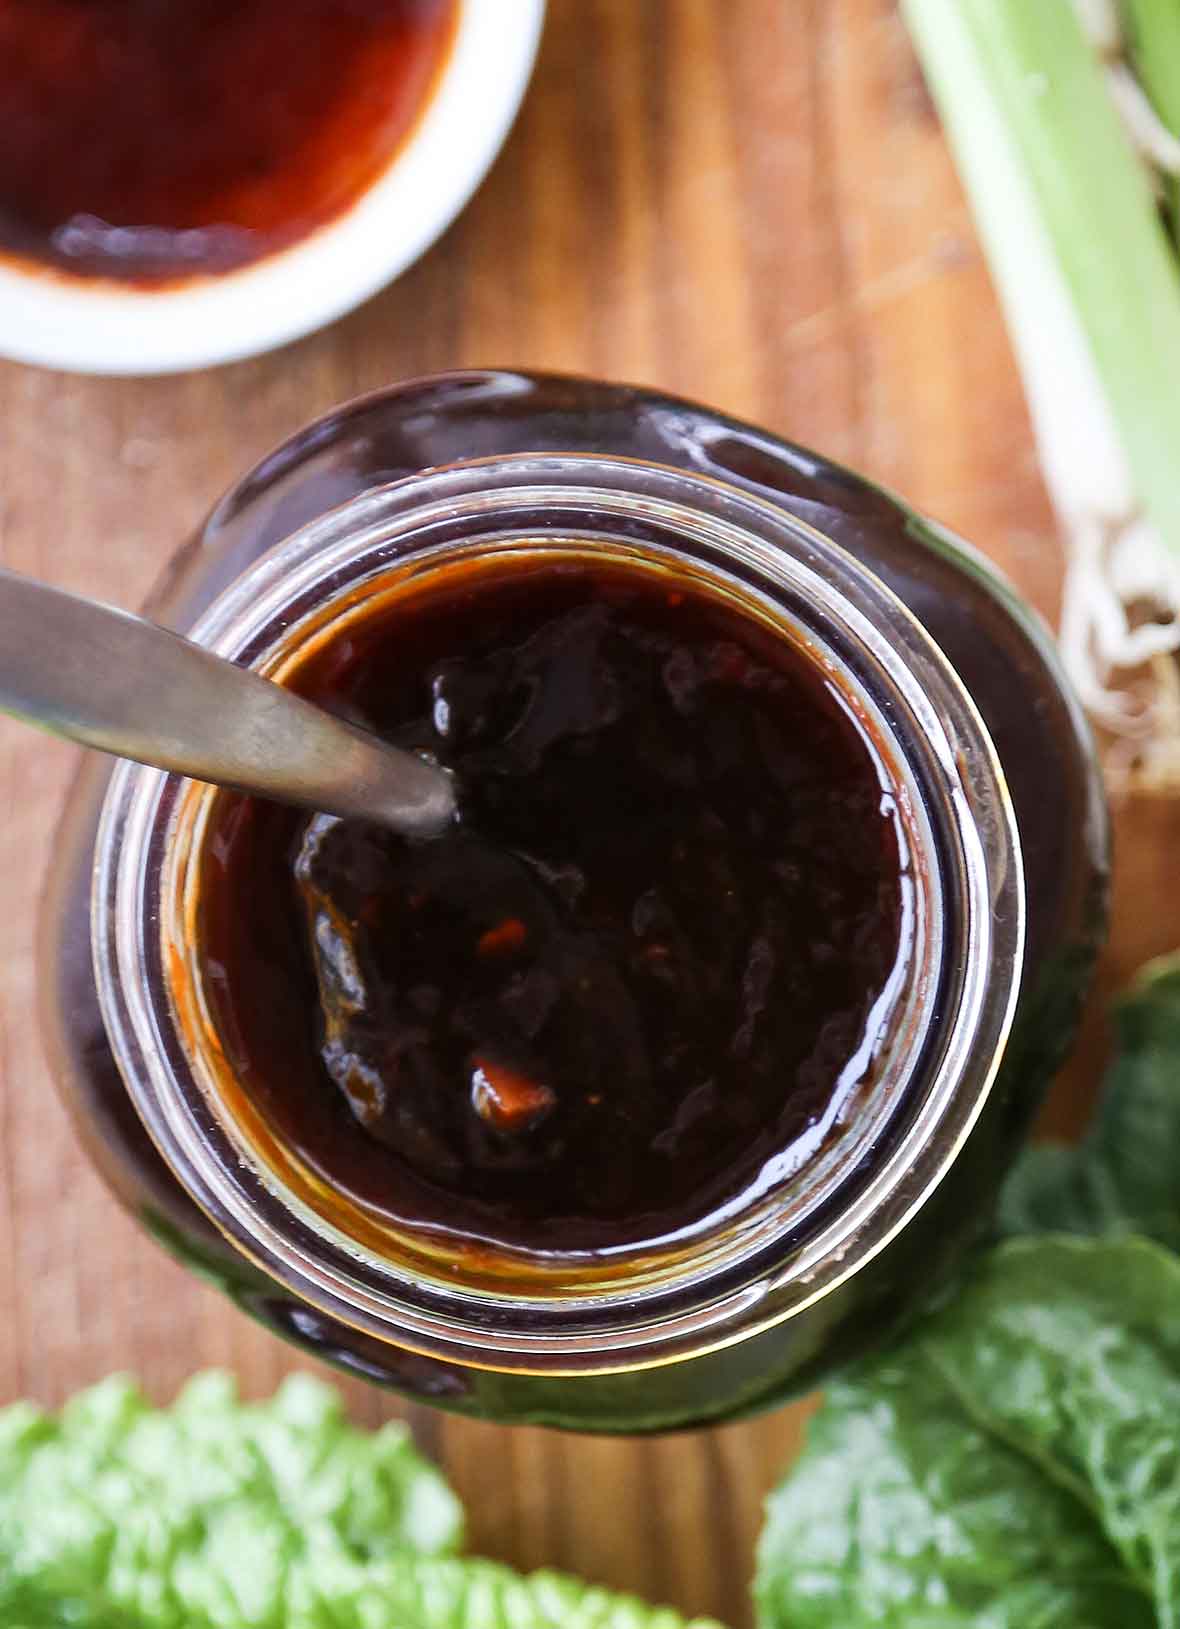 A glass jar filled with Korean barbecue sauce, with some greens beside it.